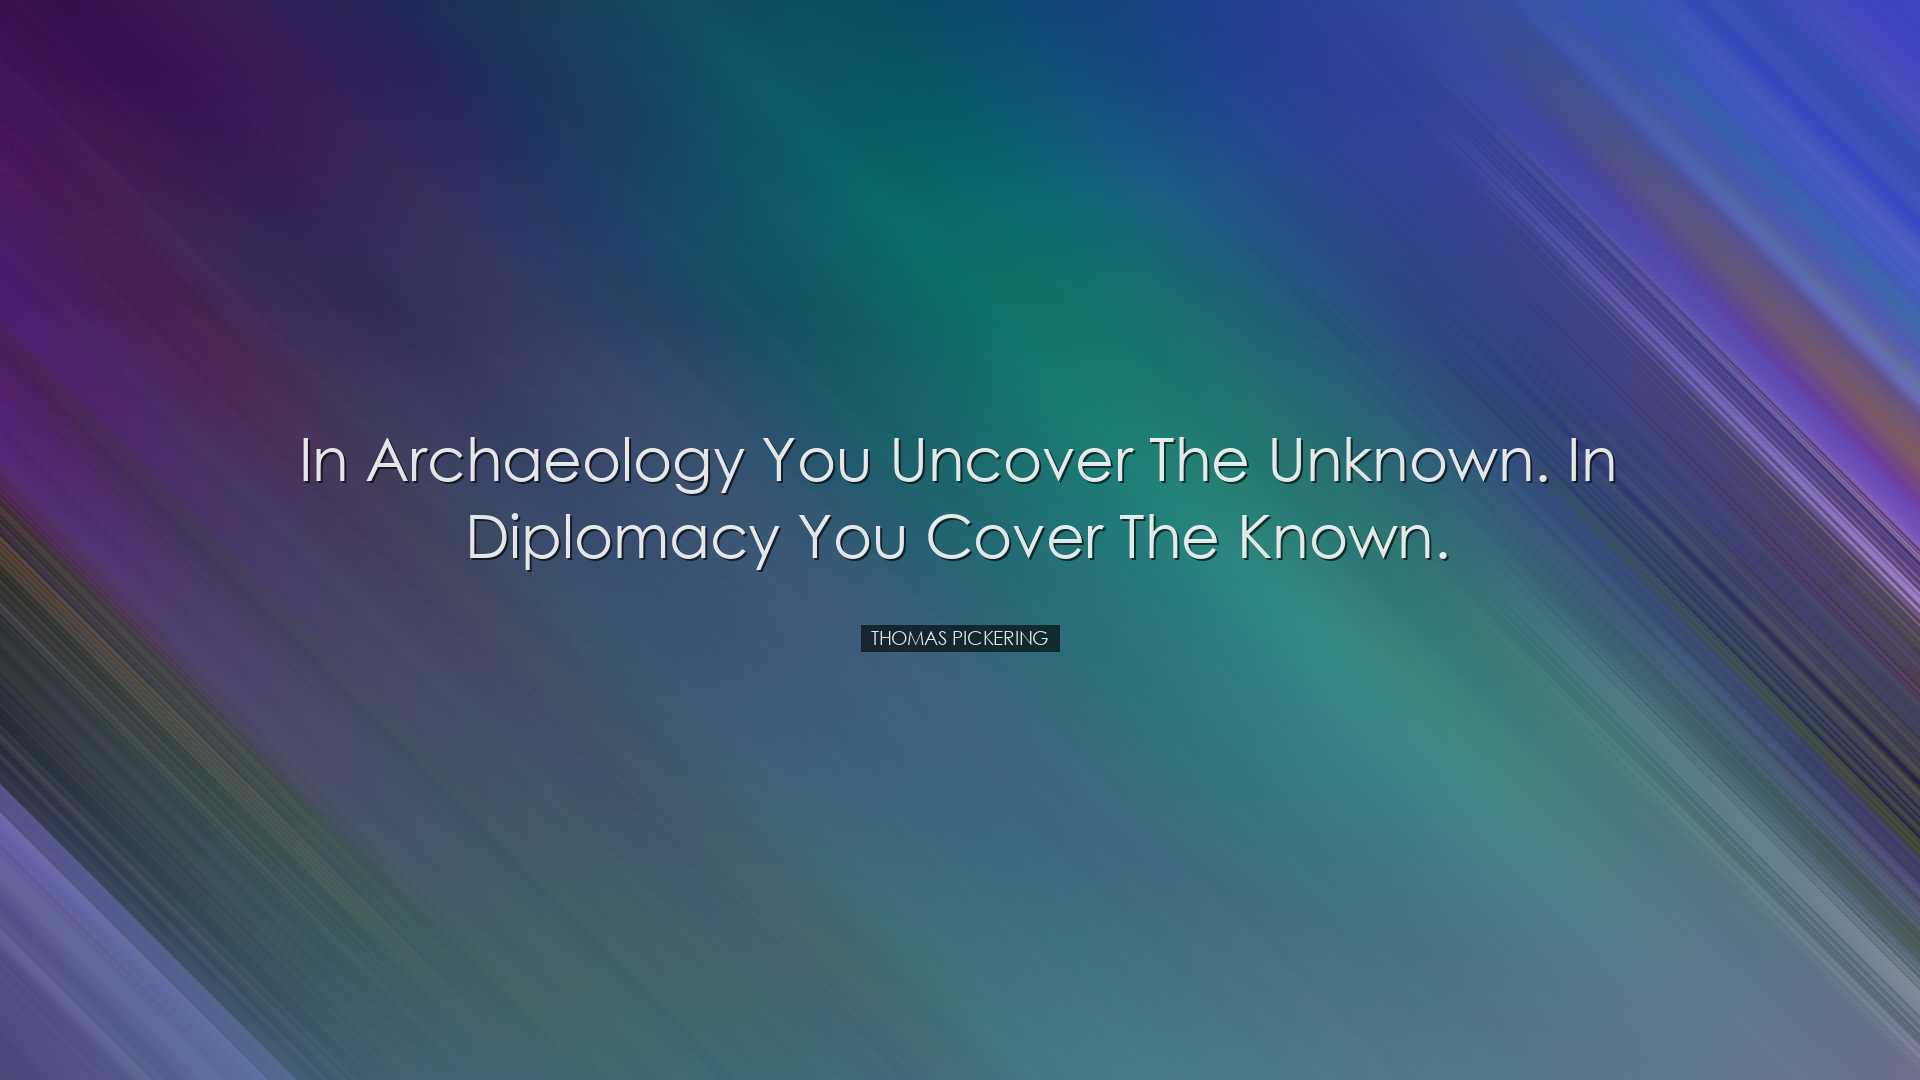 In archaeology you uncover the unknown. In diplomacy you cover the